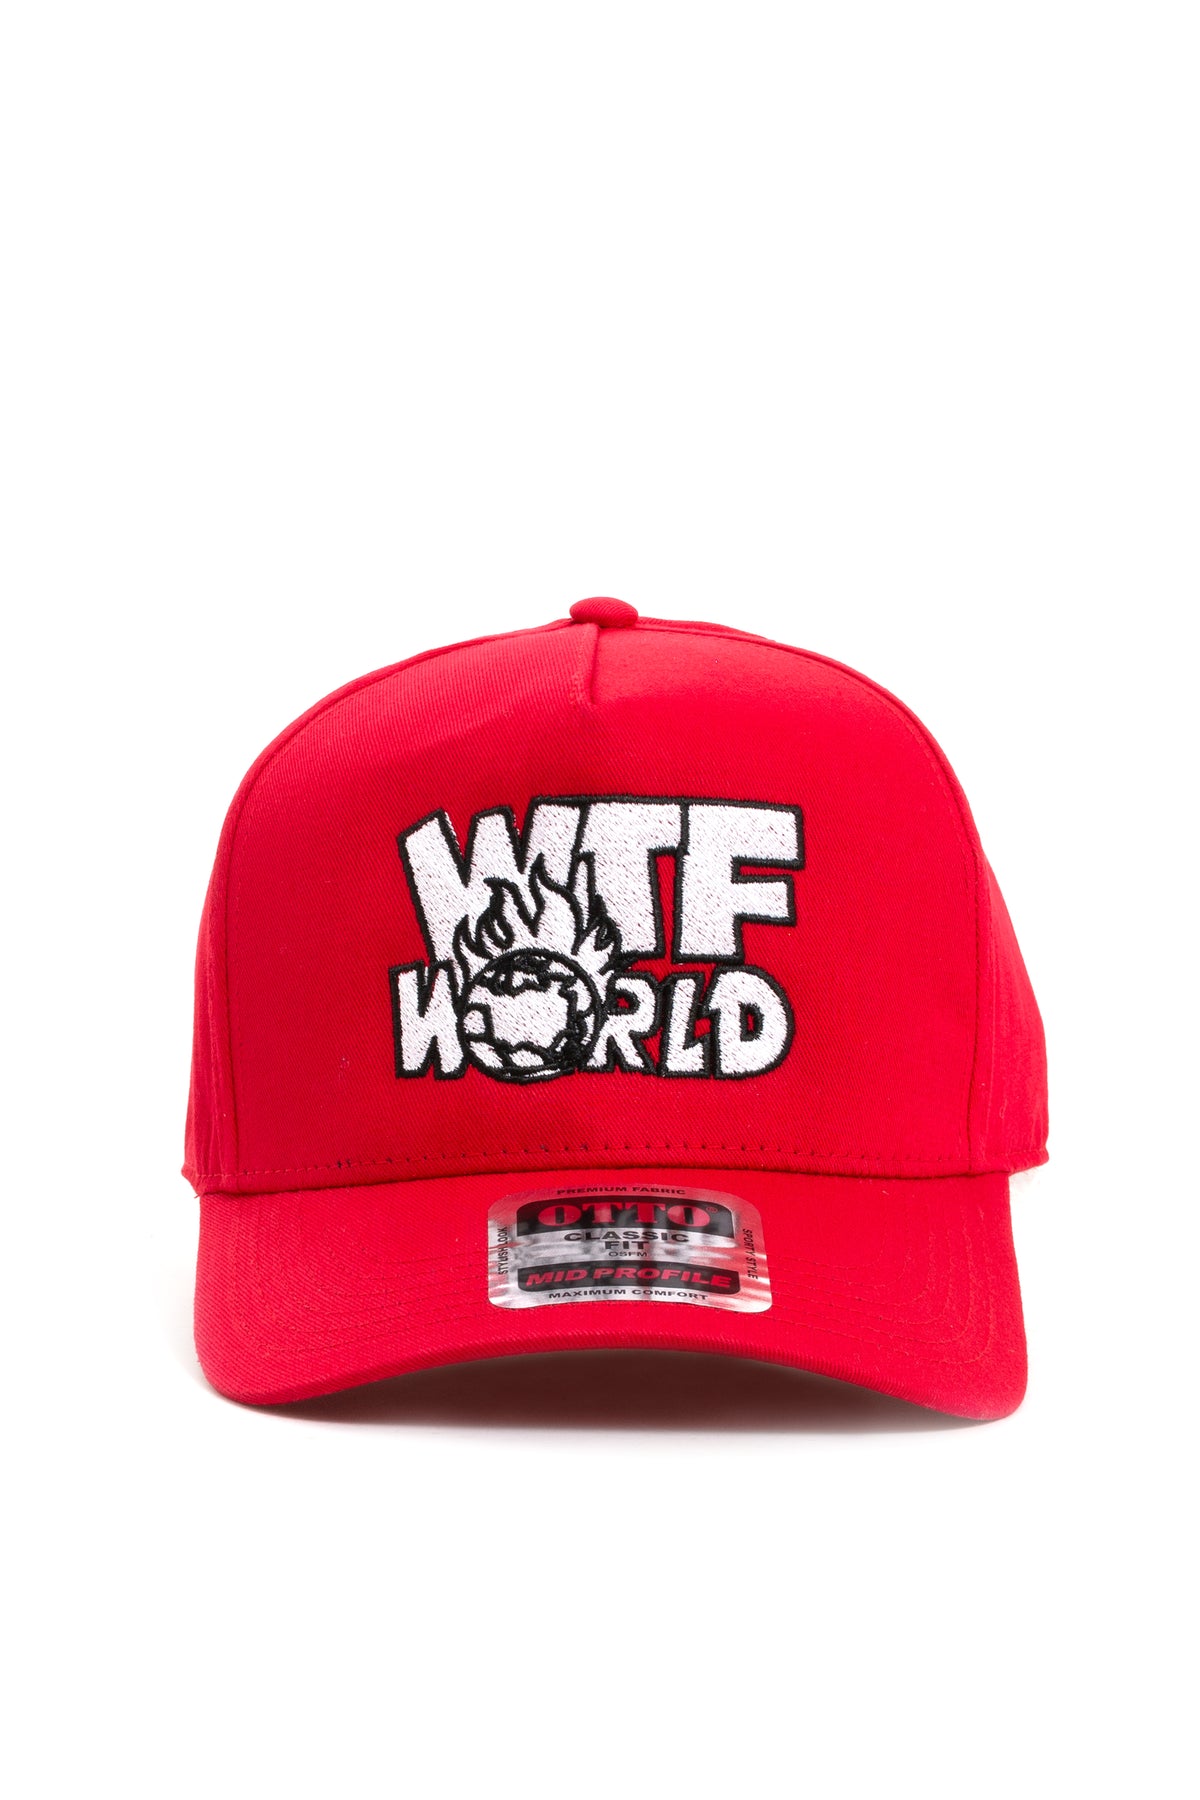 WTF WORLD HAT / RED